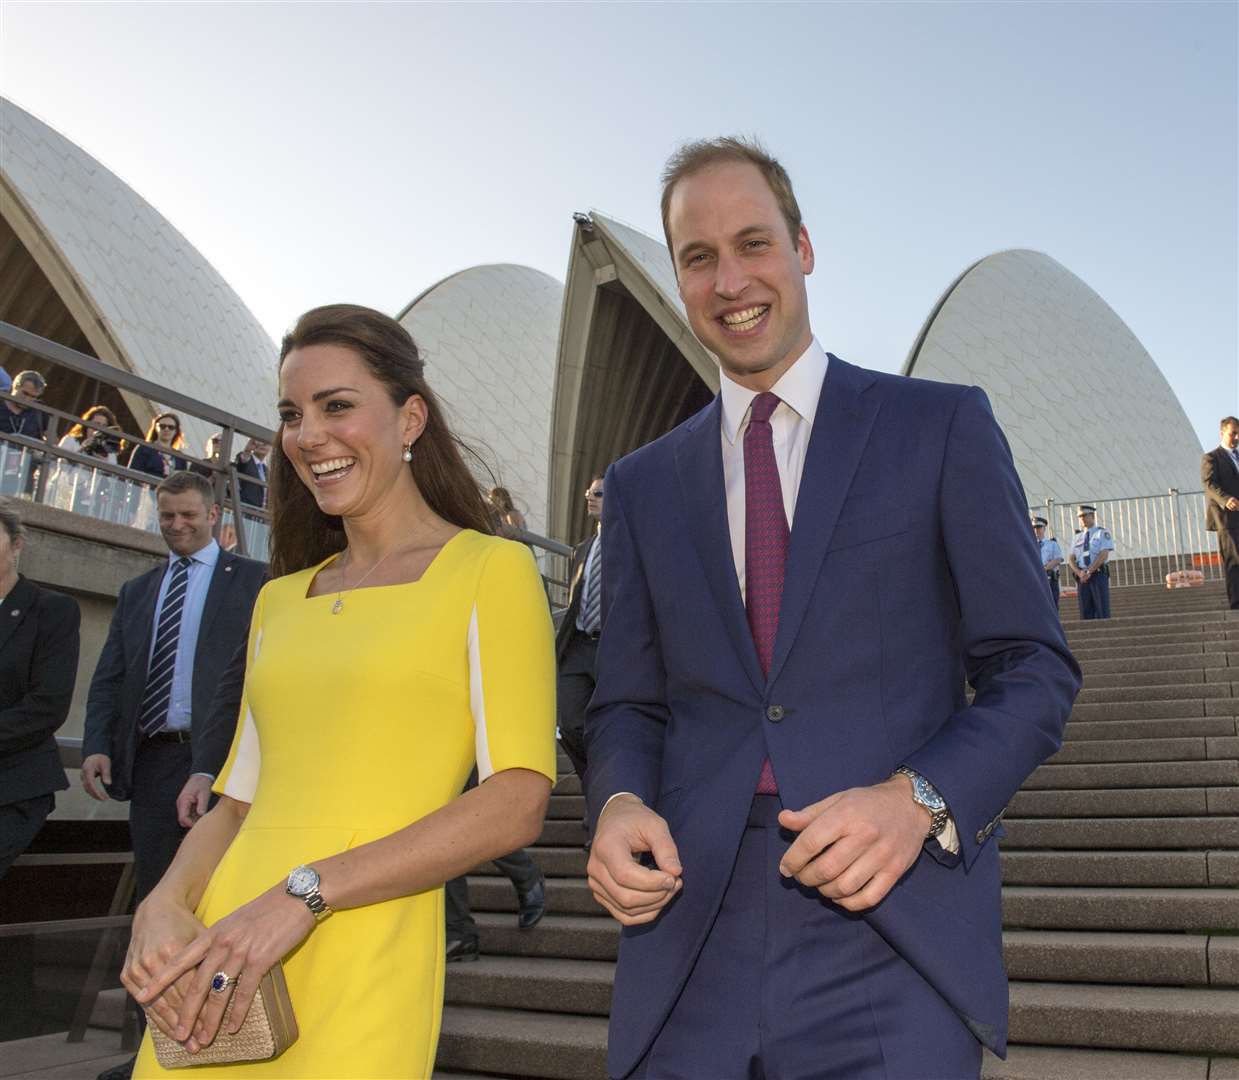 The duke and duchess after a reception at the Sydney Opera House during their tour of Australia in 2014 (Arthur Edwards/The Sun/PA)